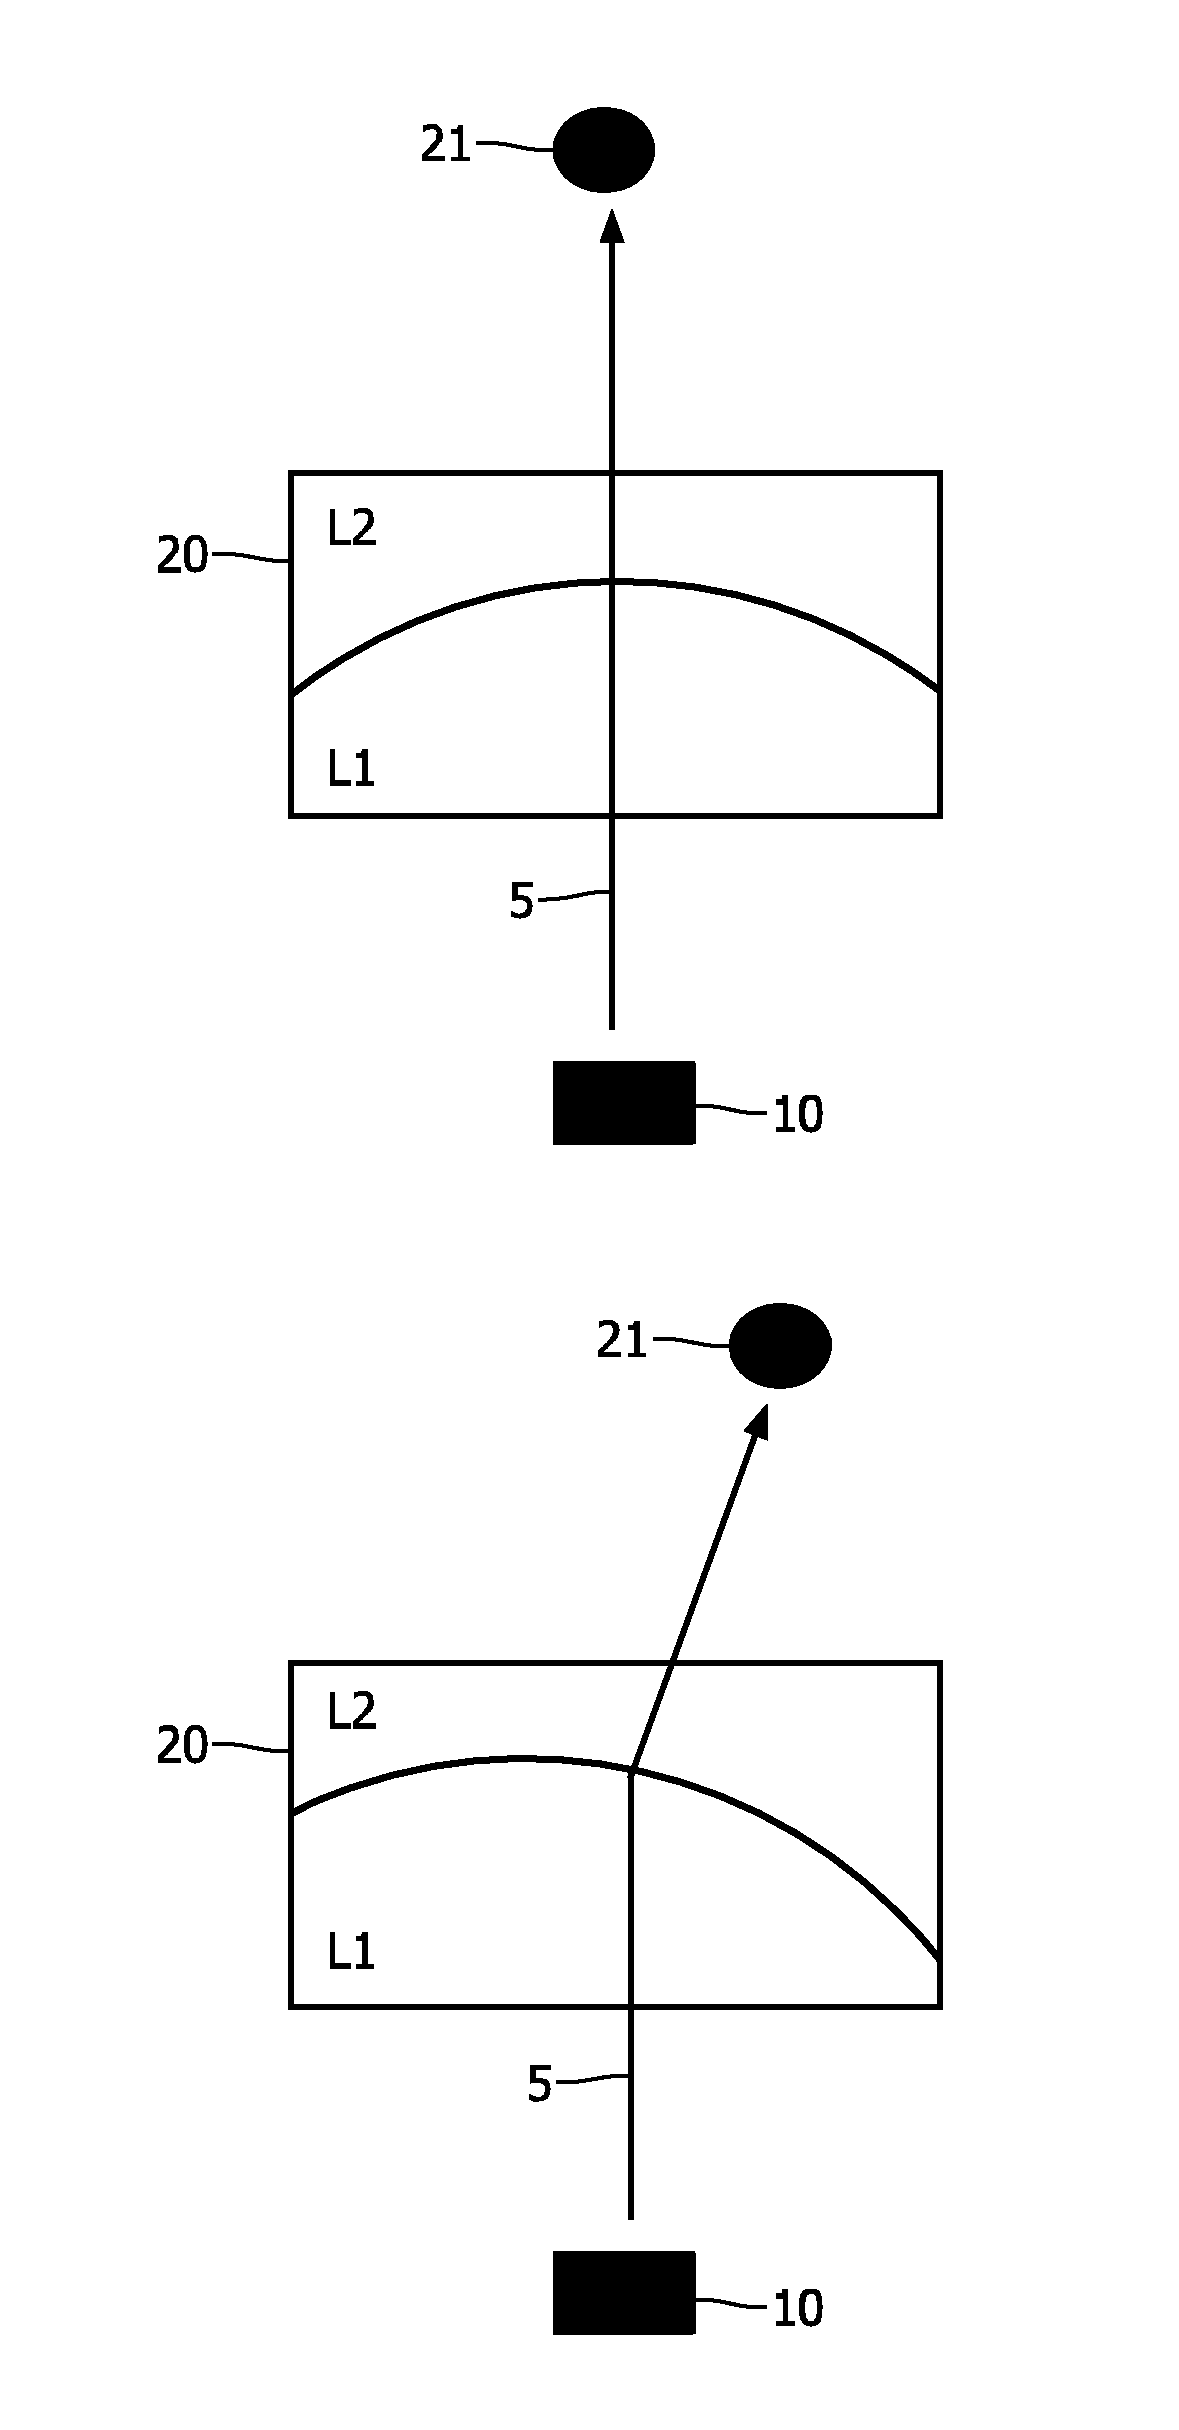 Acoustic device for ultrasonic imaging